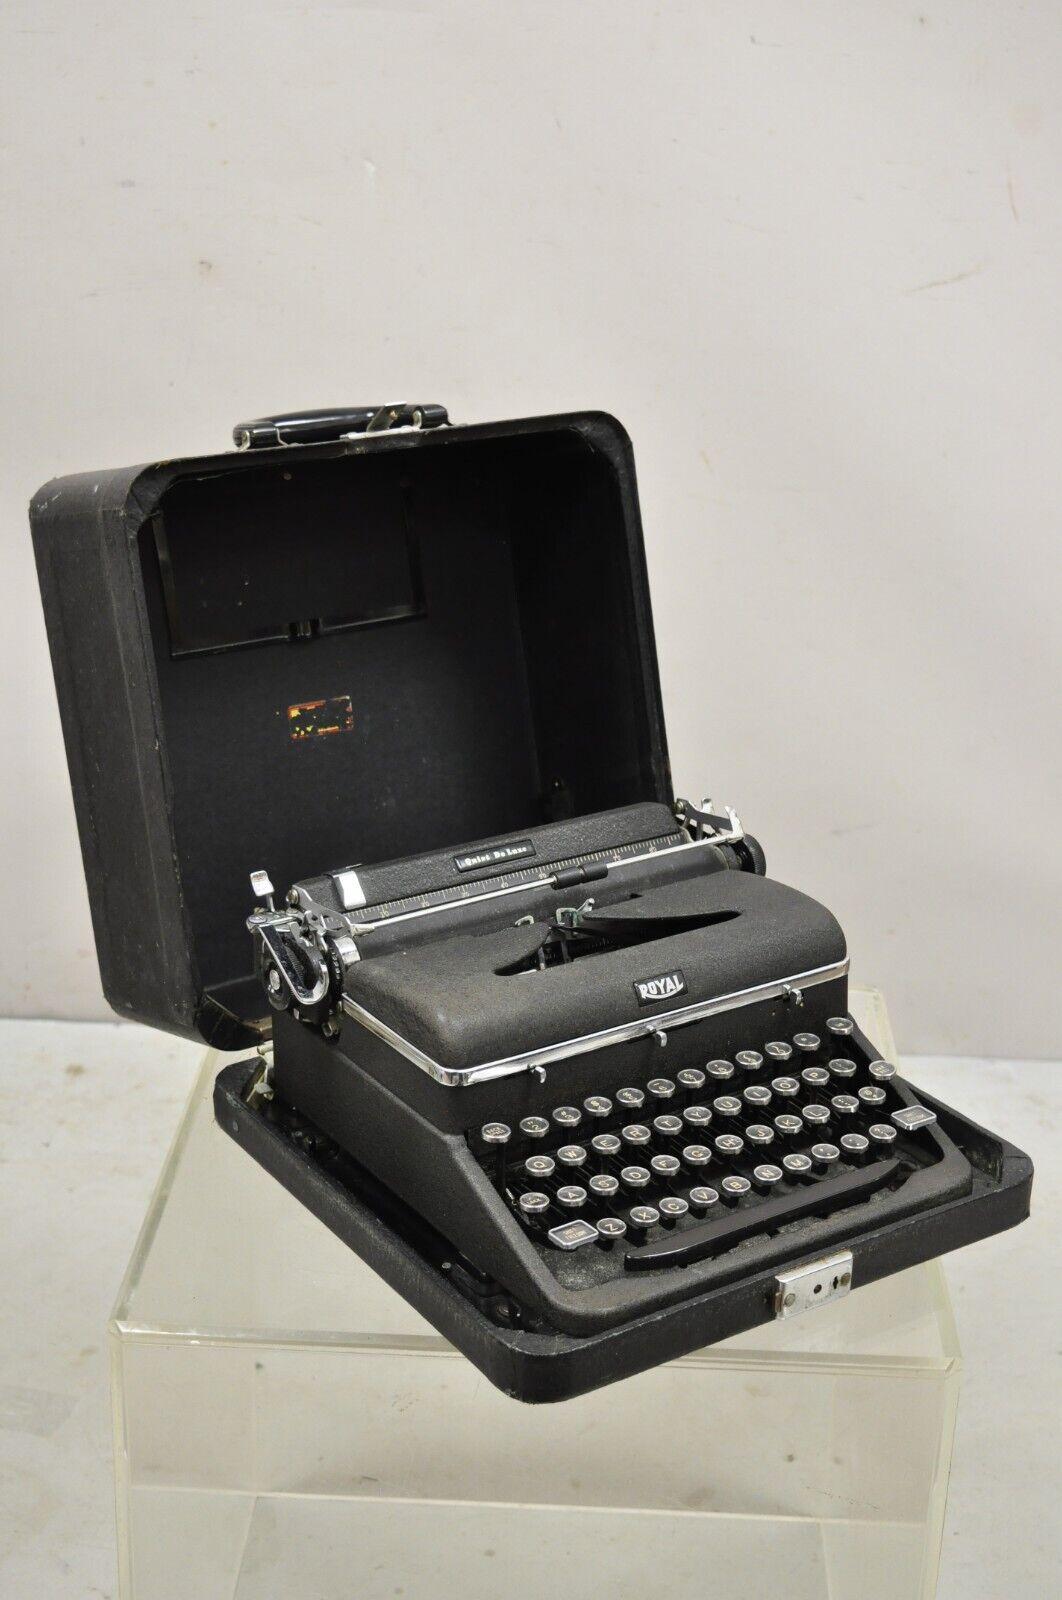 Vintage Royal Typewriter Co quiet deluxe portable typewriter in box case. Circa early 20th century. Measurements: Case: 7